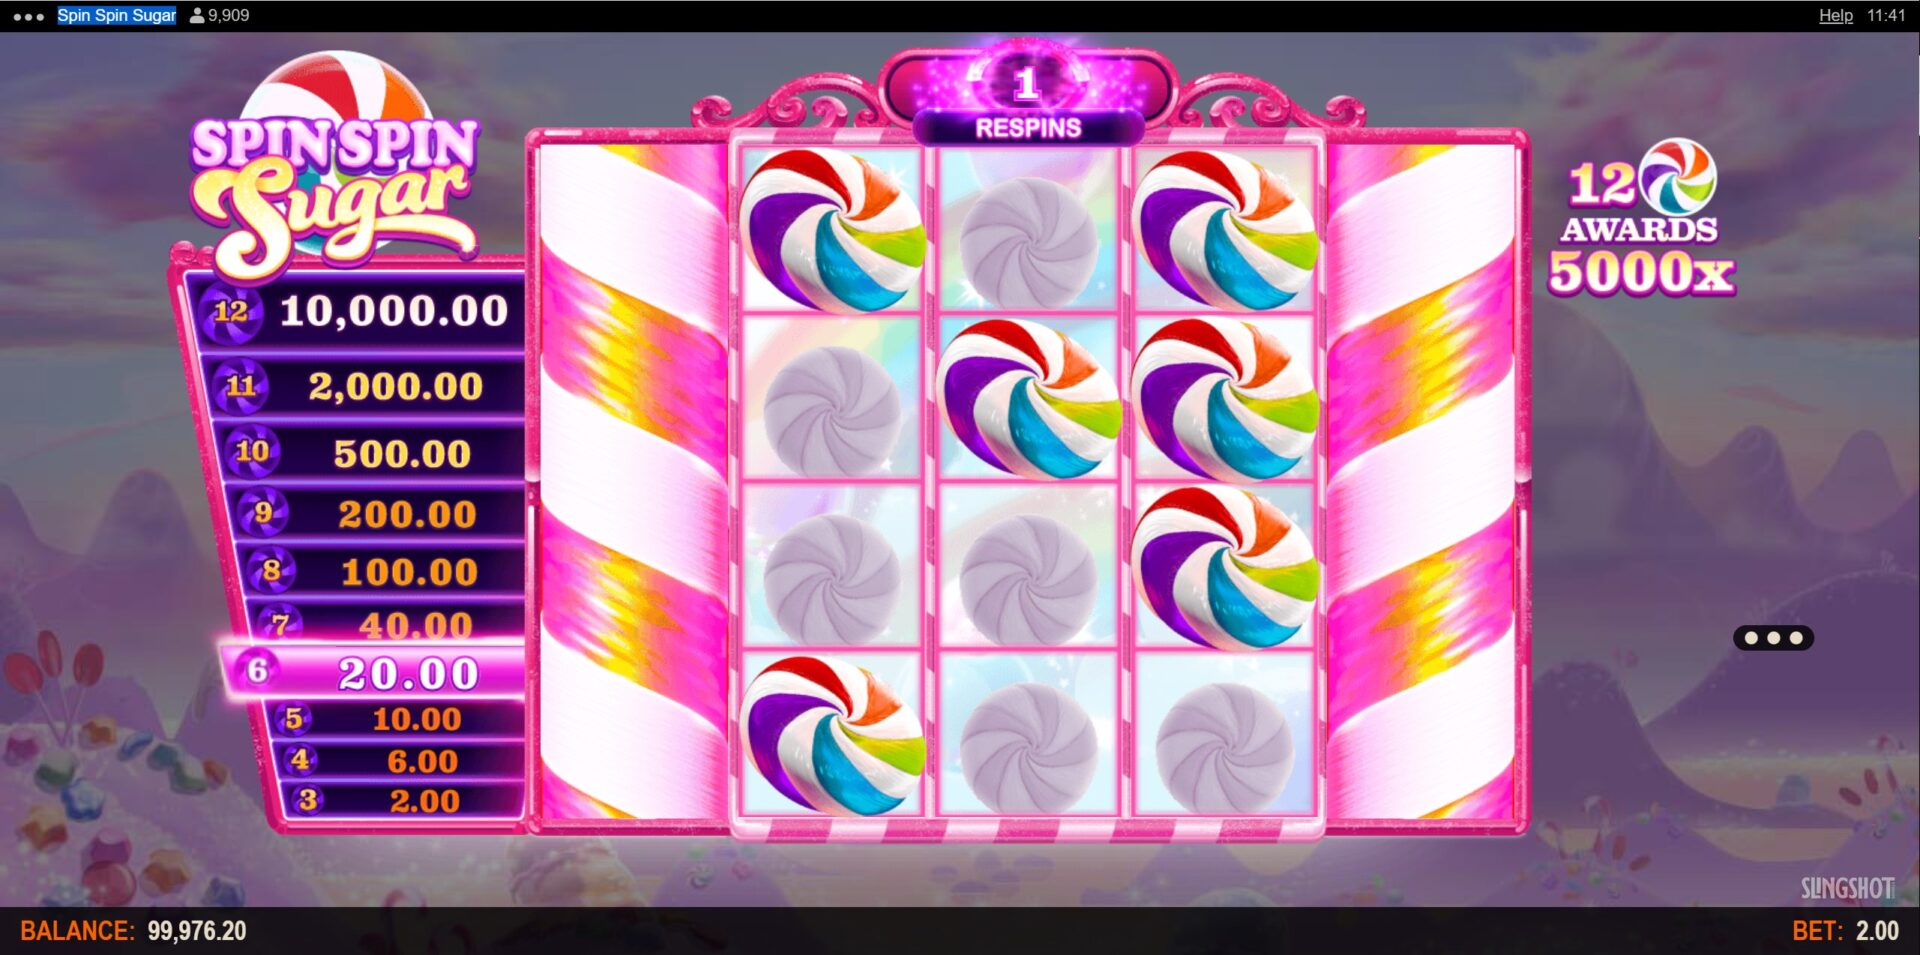 Spin Spin Sugar Slot - Respins Feature